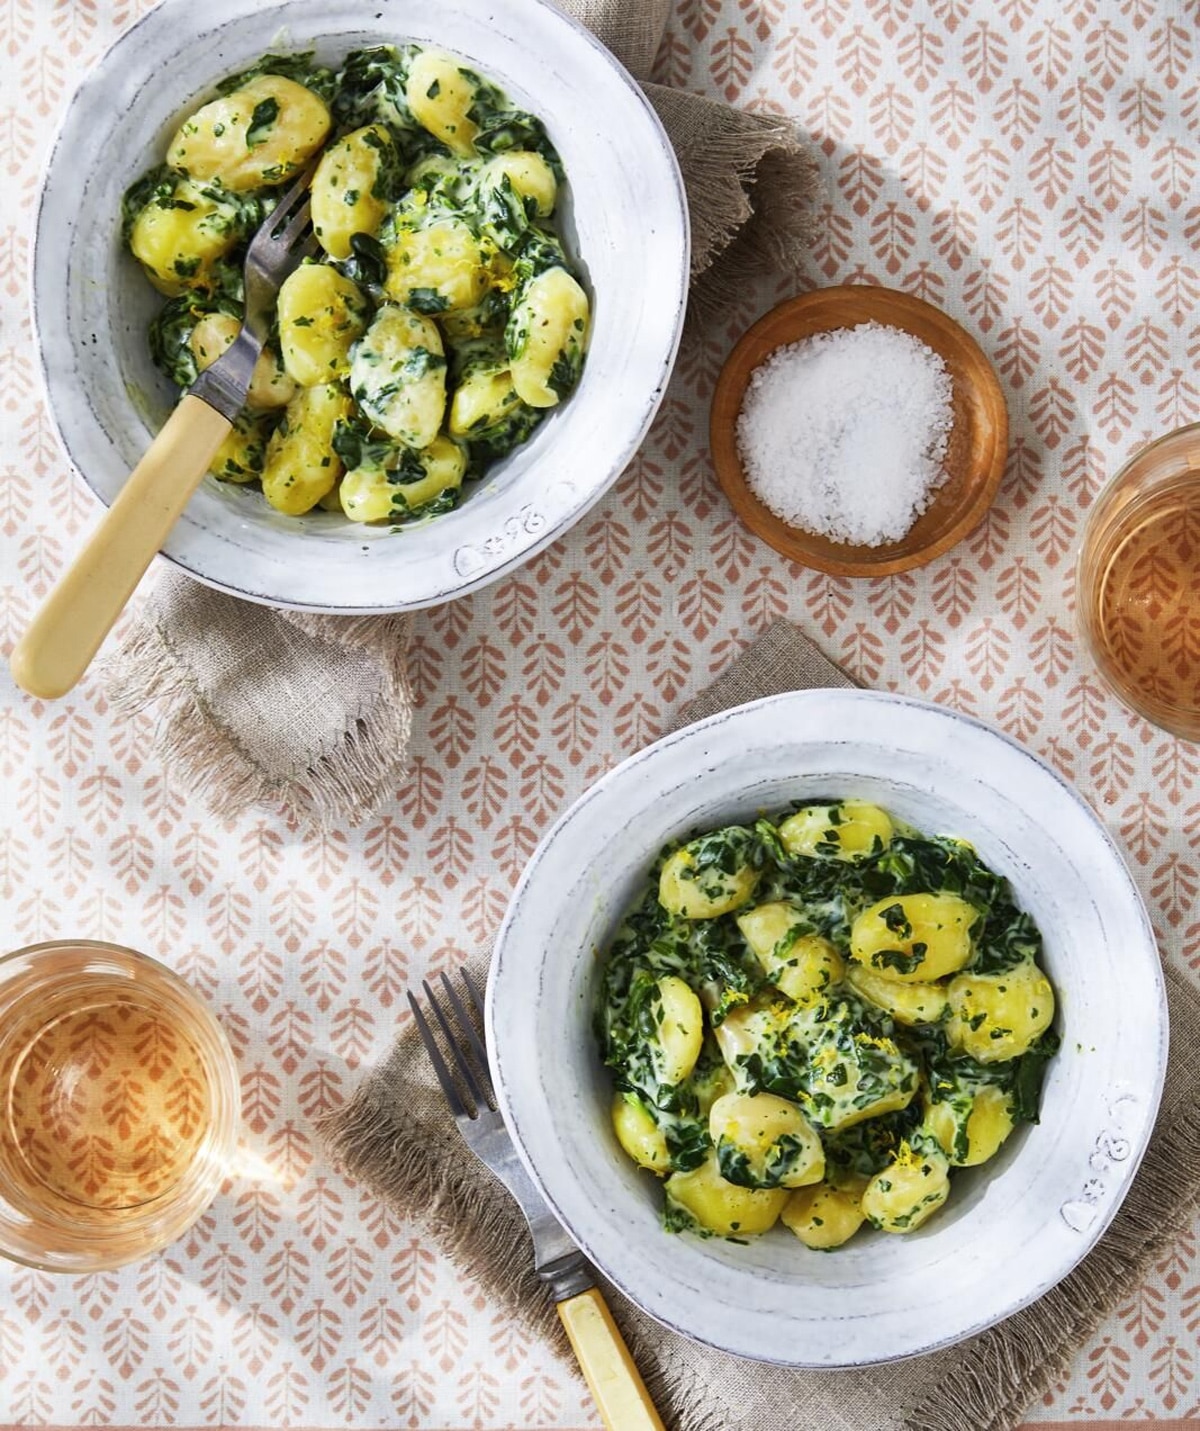 Gnocchi with creamed spinach